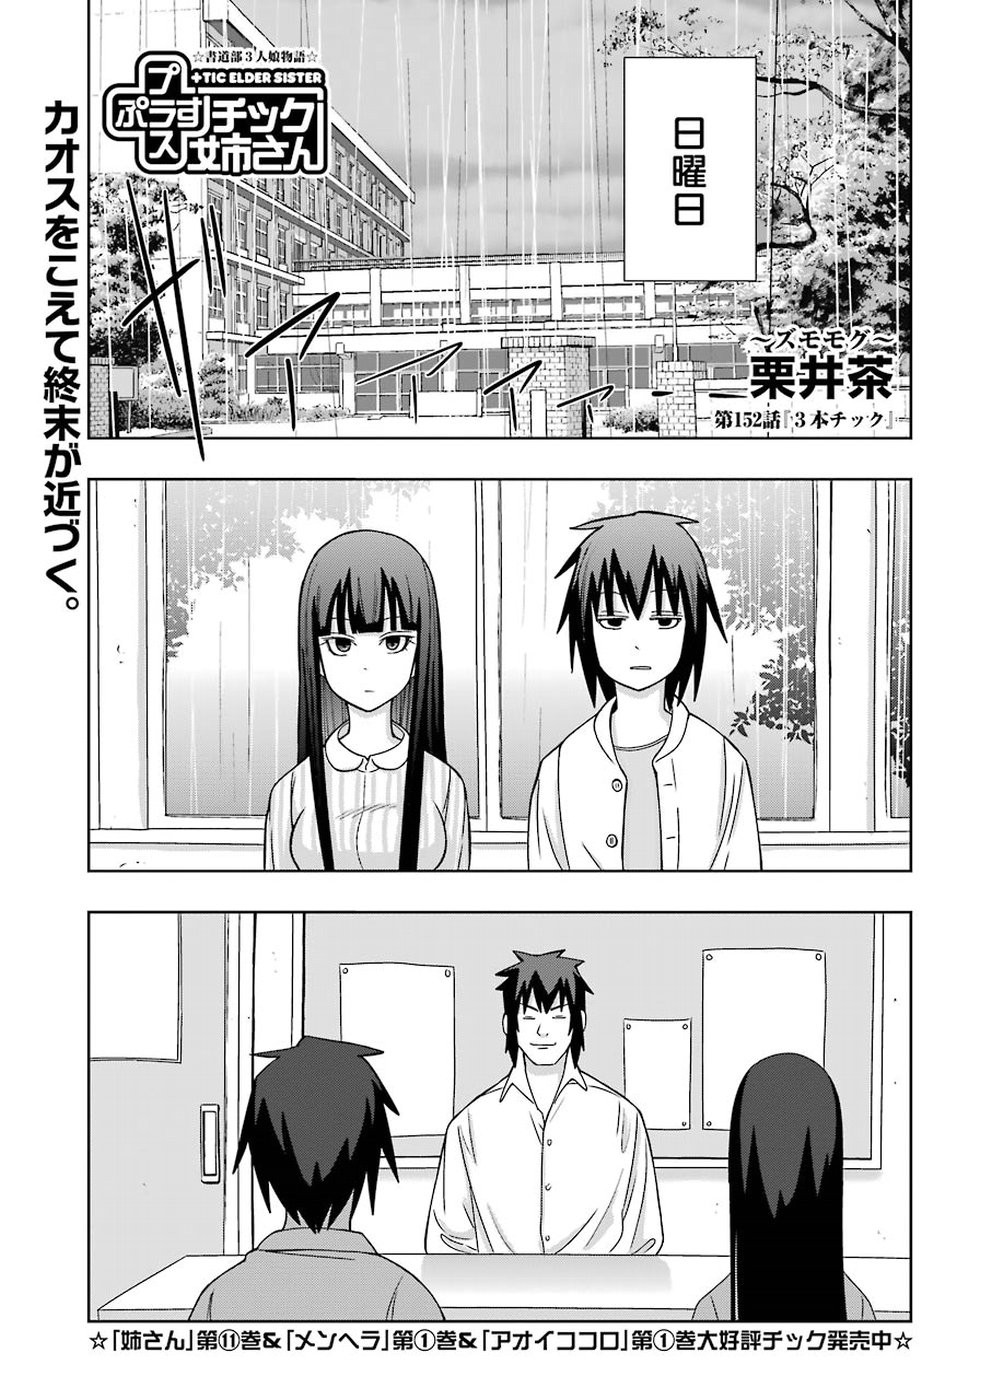 + Tic Nee-san - Chapter 152 - Page 1